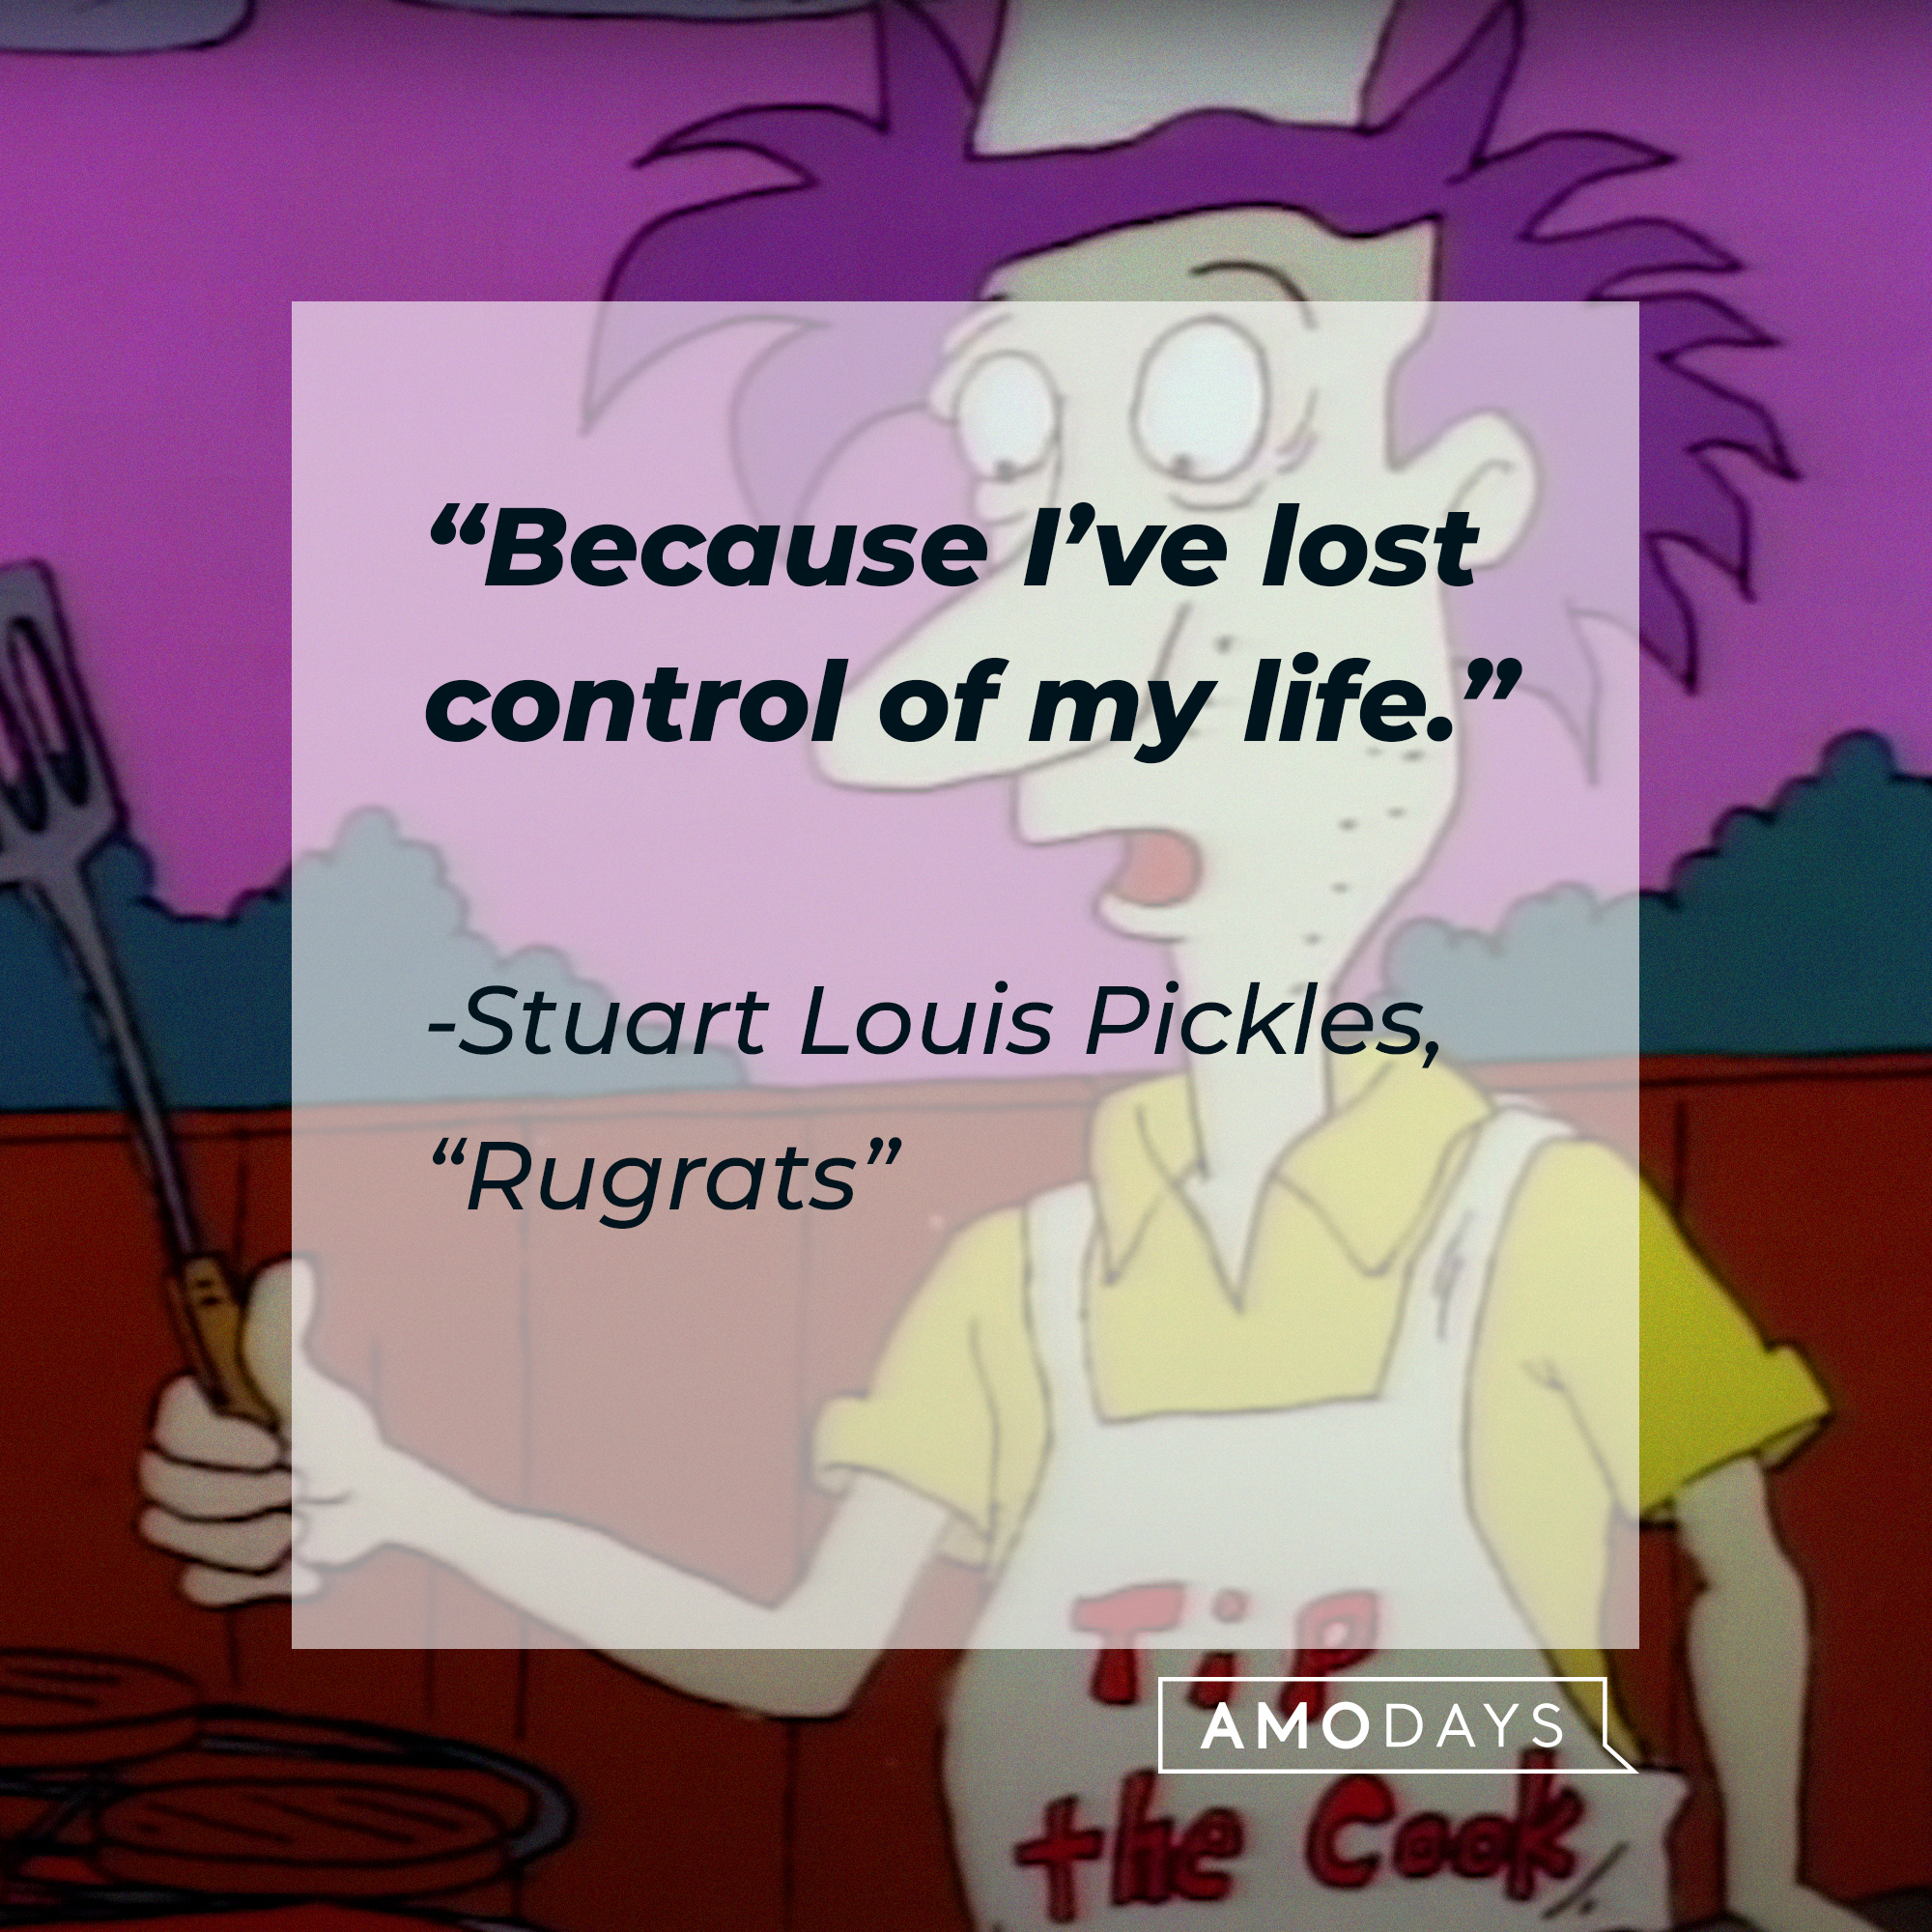 Stuart Pickles' and his quote: “Because I’ve lost control of my life.” | Source: Facebook.com/Rugrats